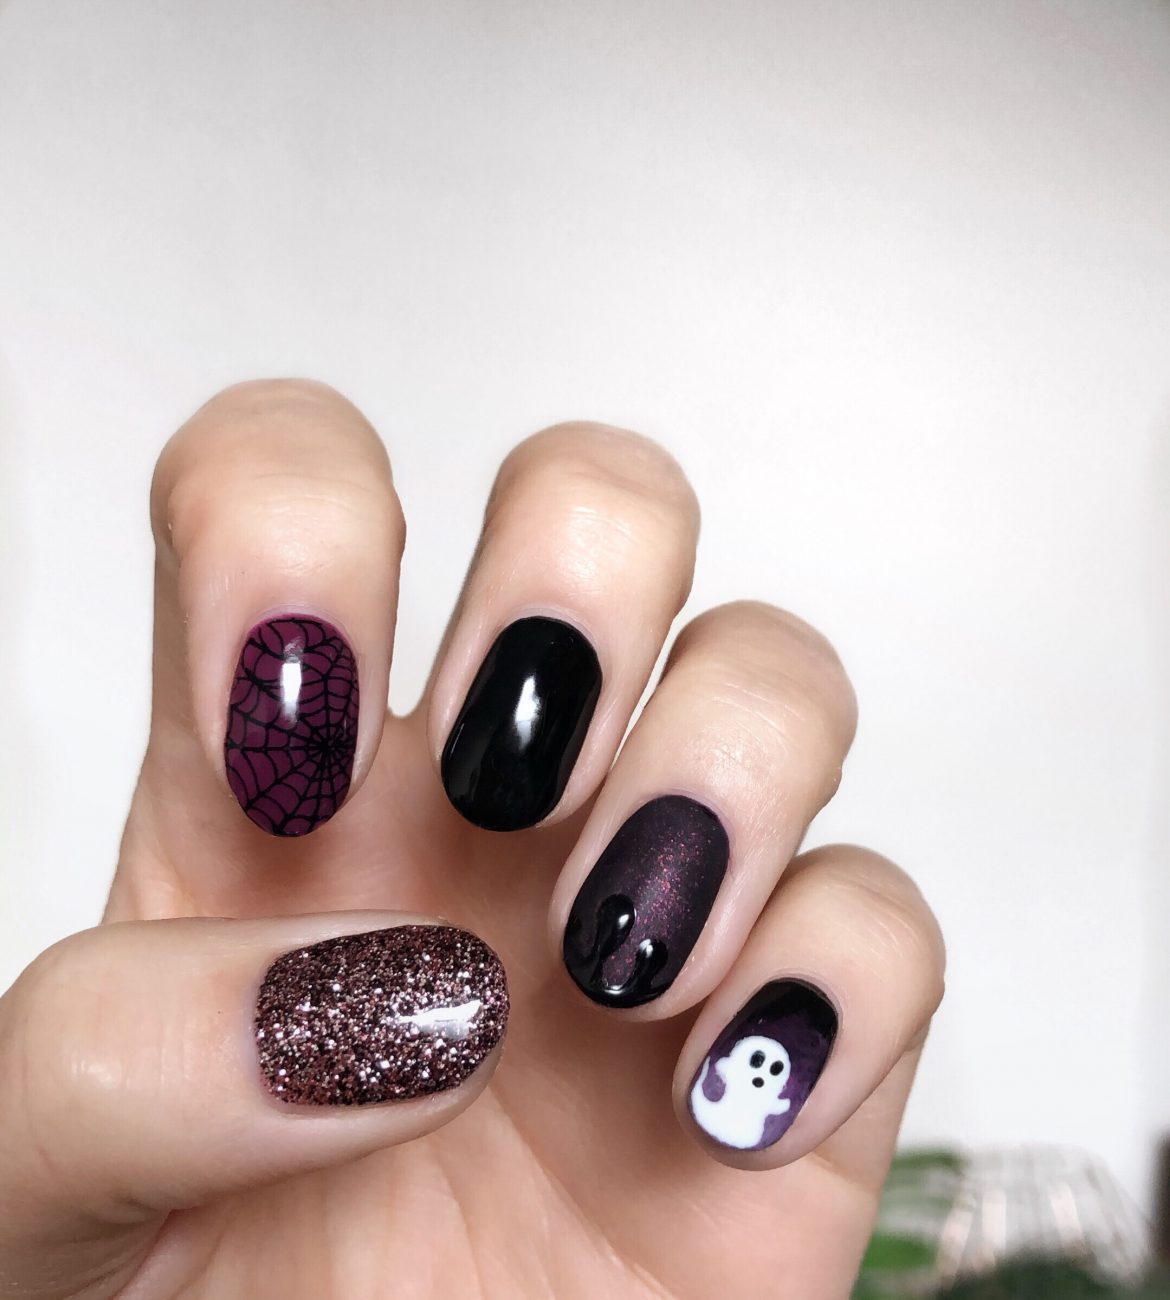 Shades Of Purple For Halloween